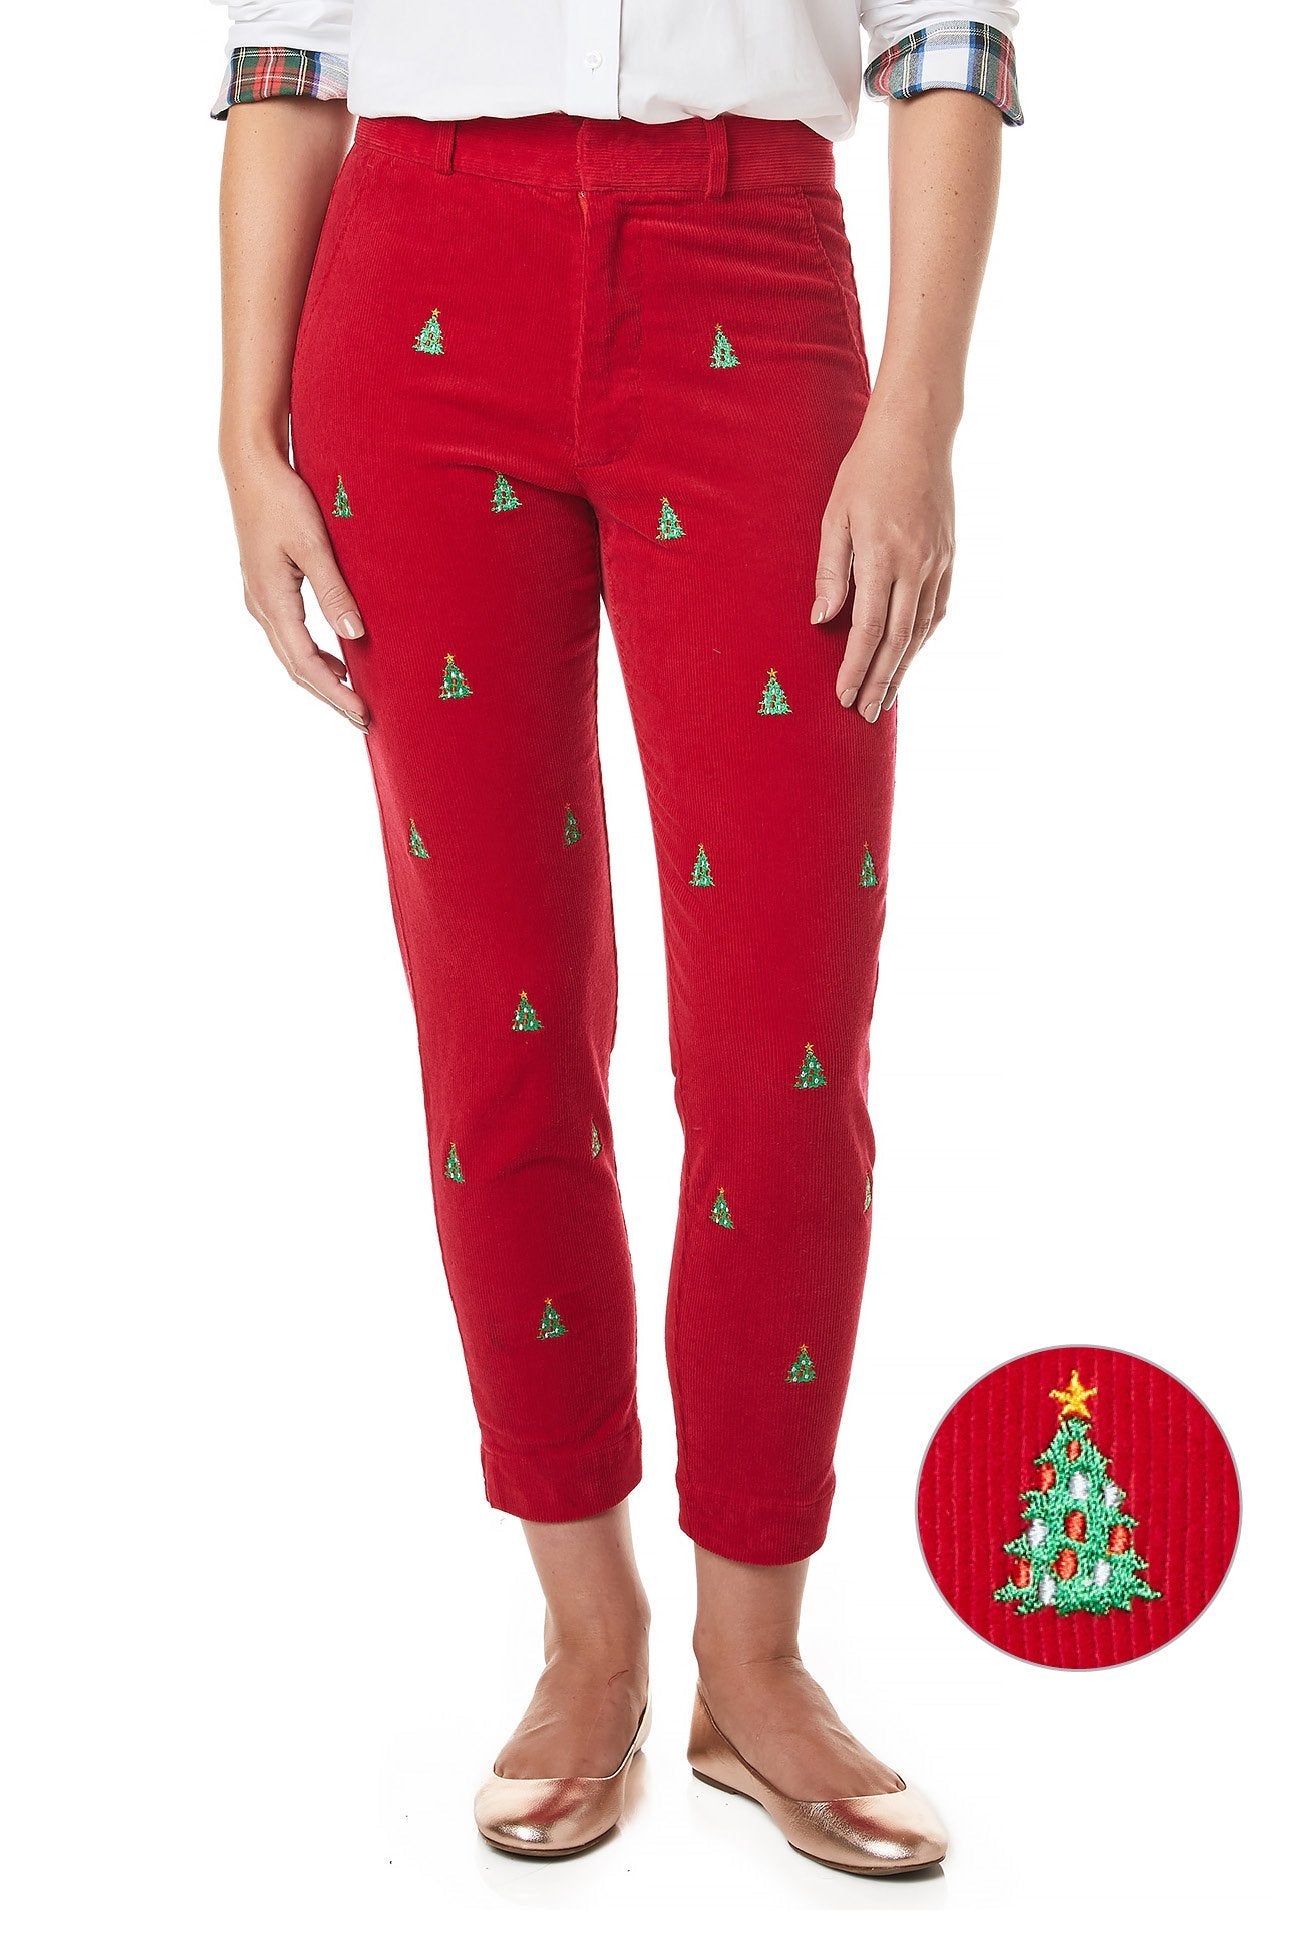 Mapale red Christmas capri pants outfit